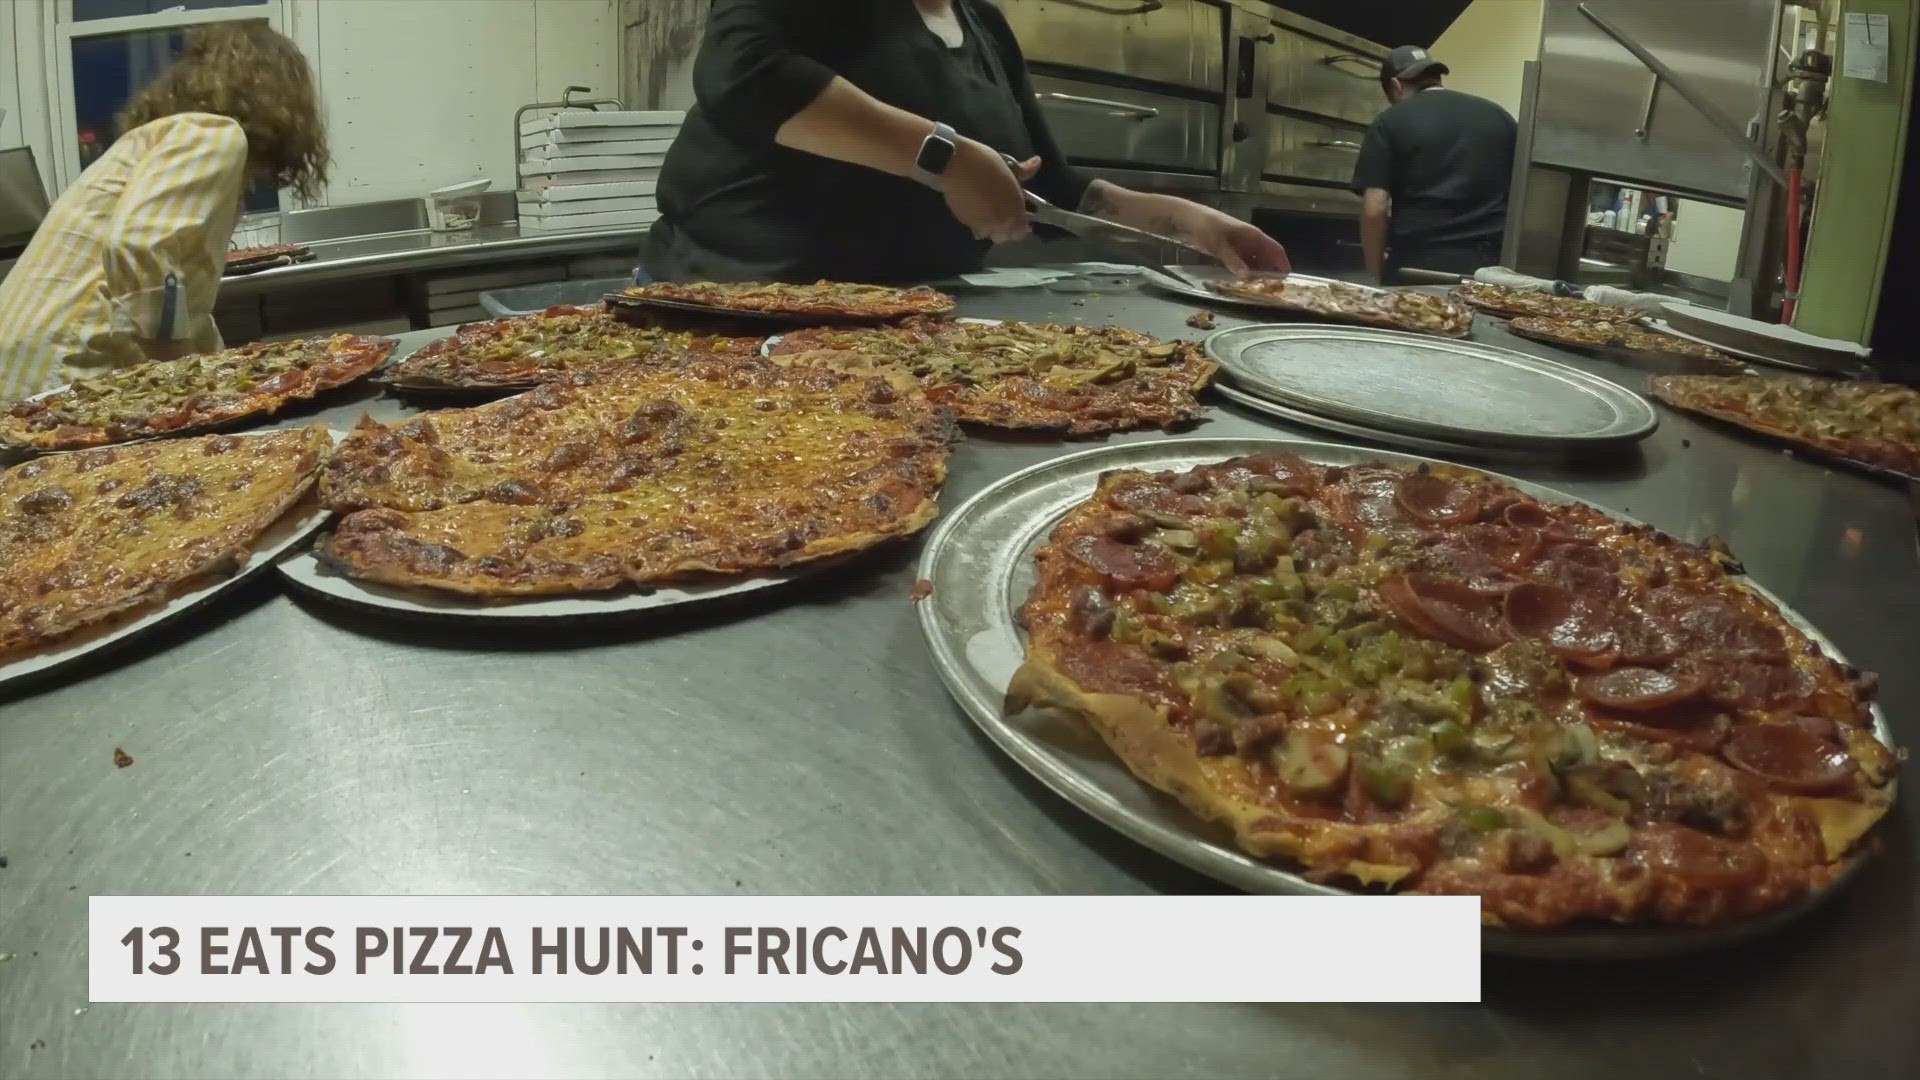 It was the first pizza place to exist in West Michigan. But is it still worth the trip?